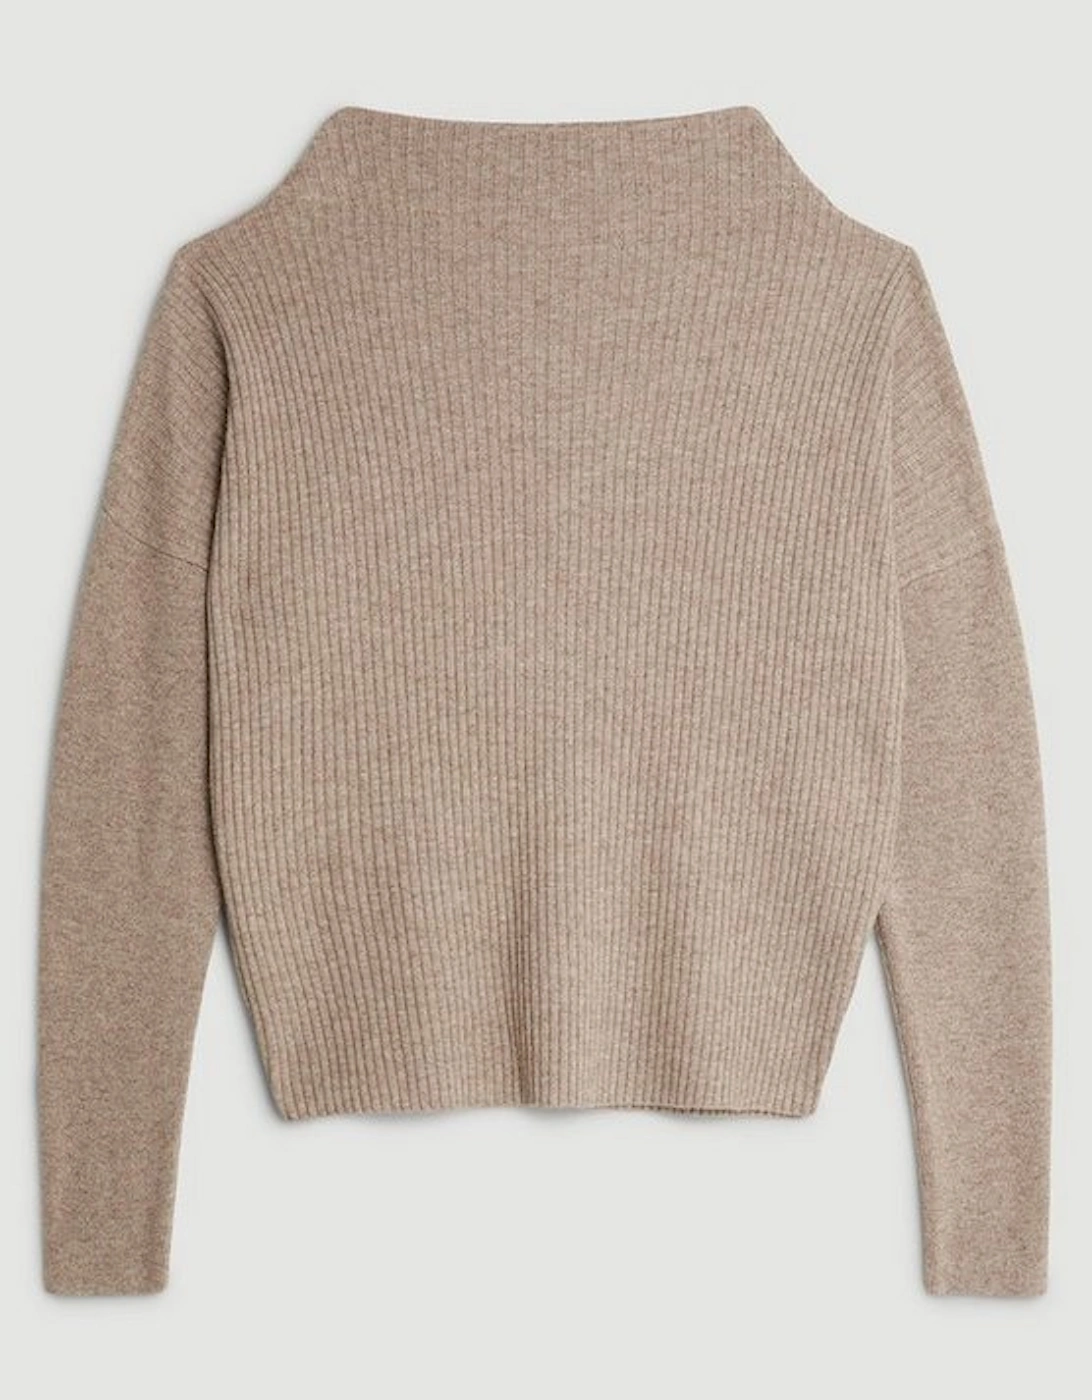 Cashmere Wool Knit Top